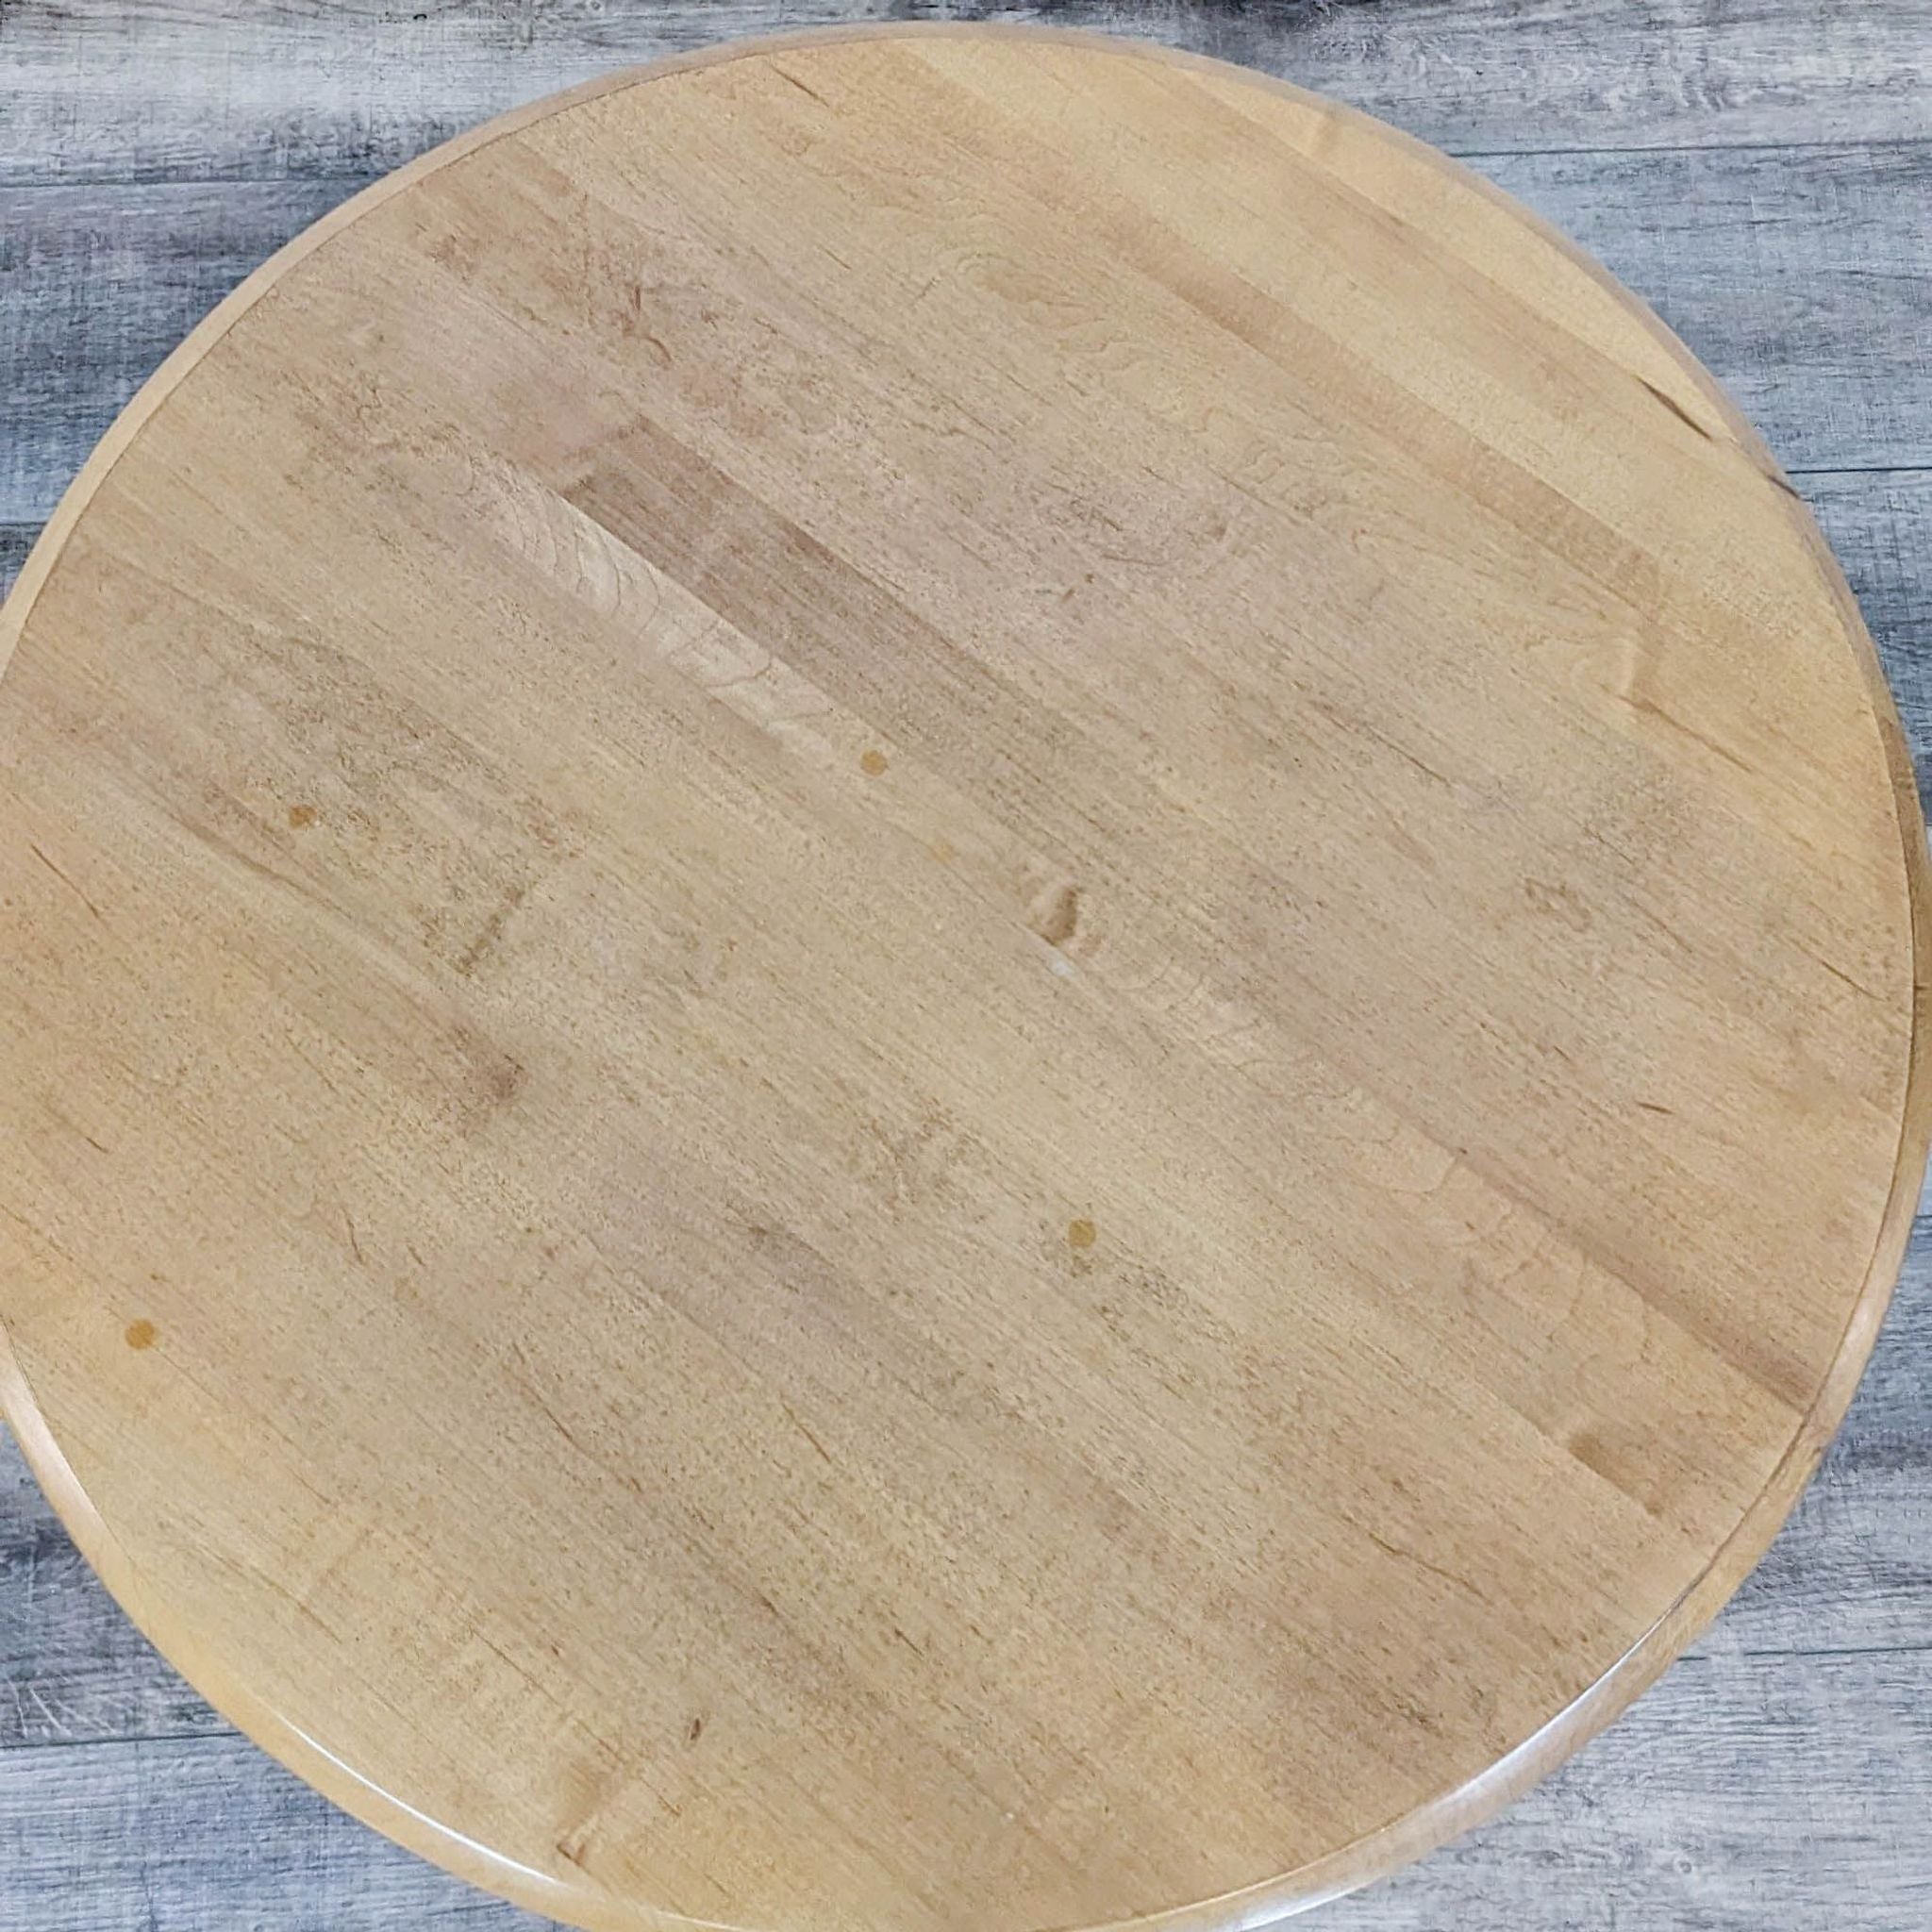 Top view of a round Ethan Allen end table showcasing the natural wood grain pattern.